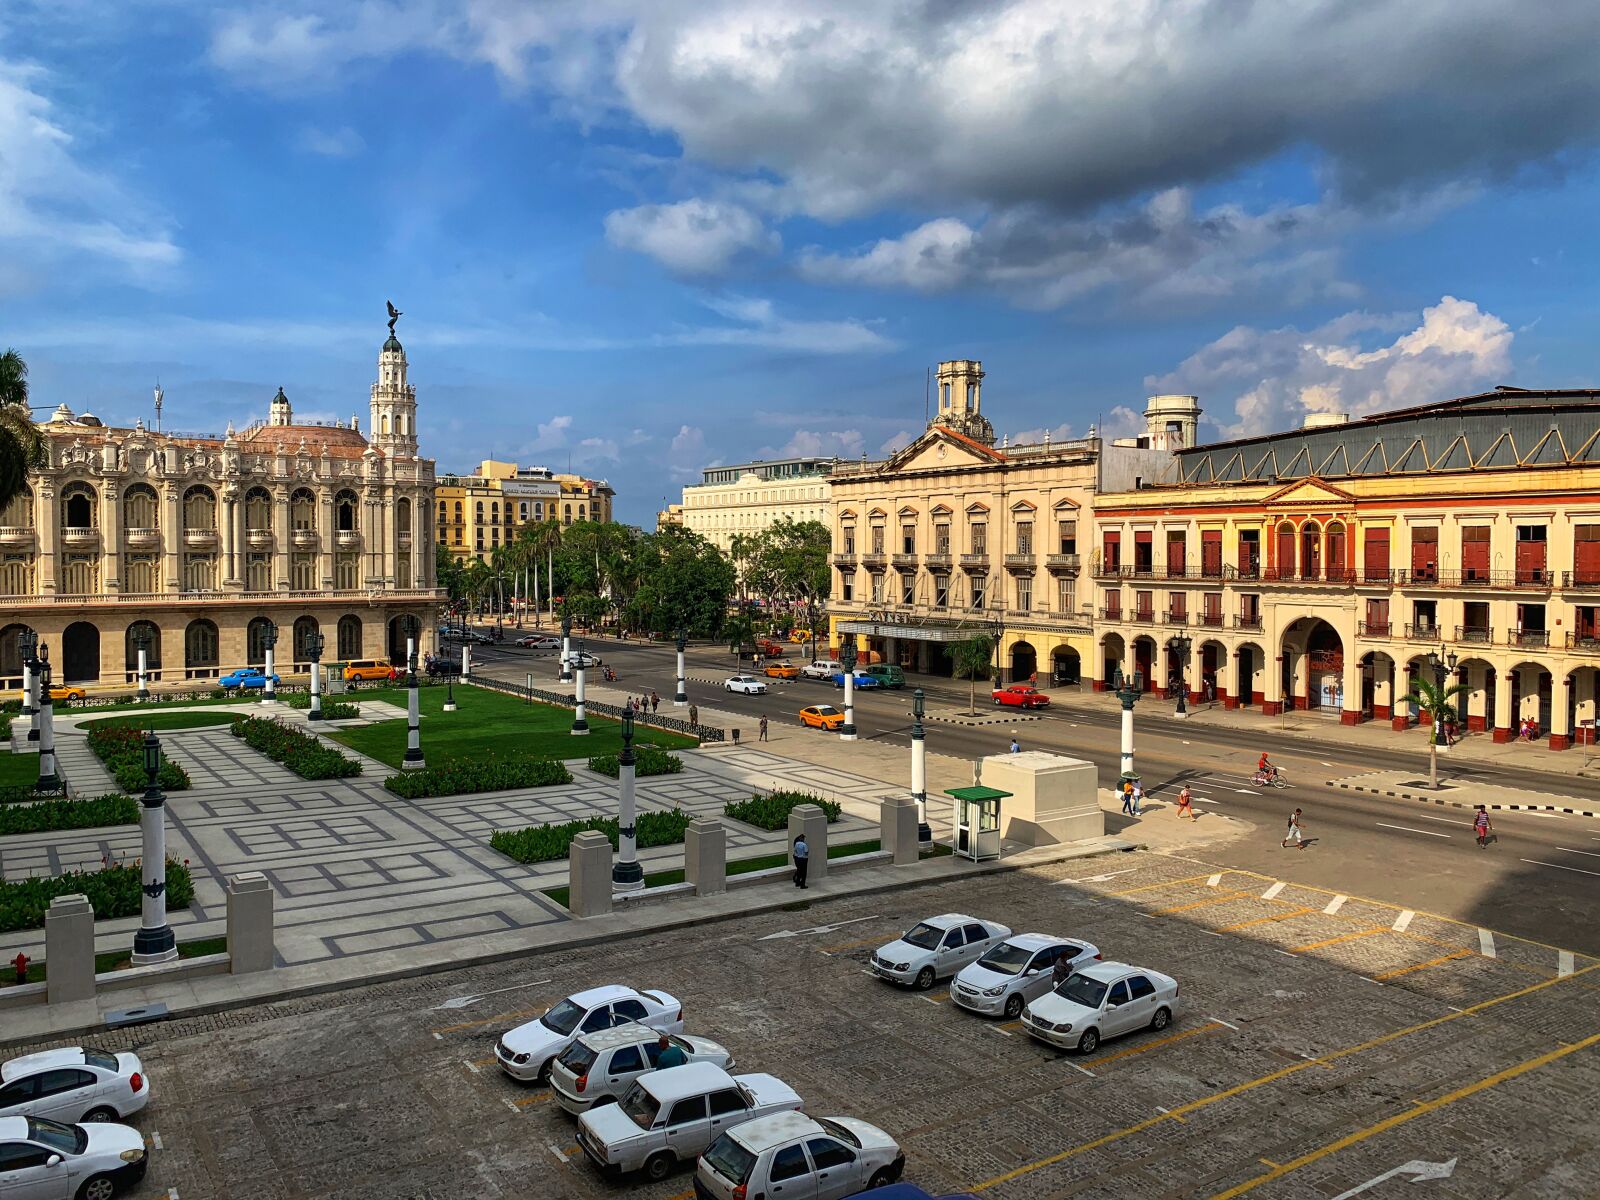 Apple iPhone XS Max + iPhone XS Max back dual camera 4.25mm f/1.8 sample photo. Havana, capitol, clouds photography